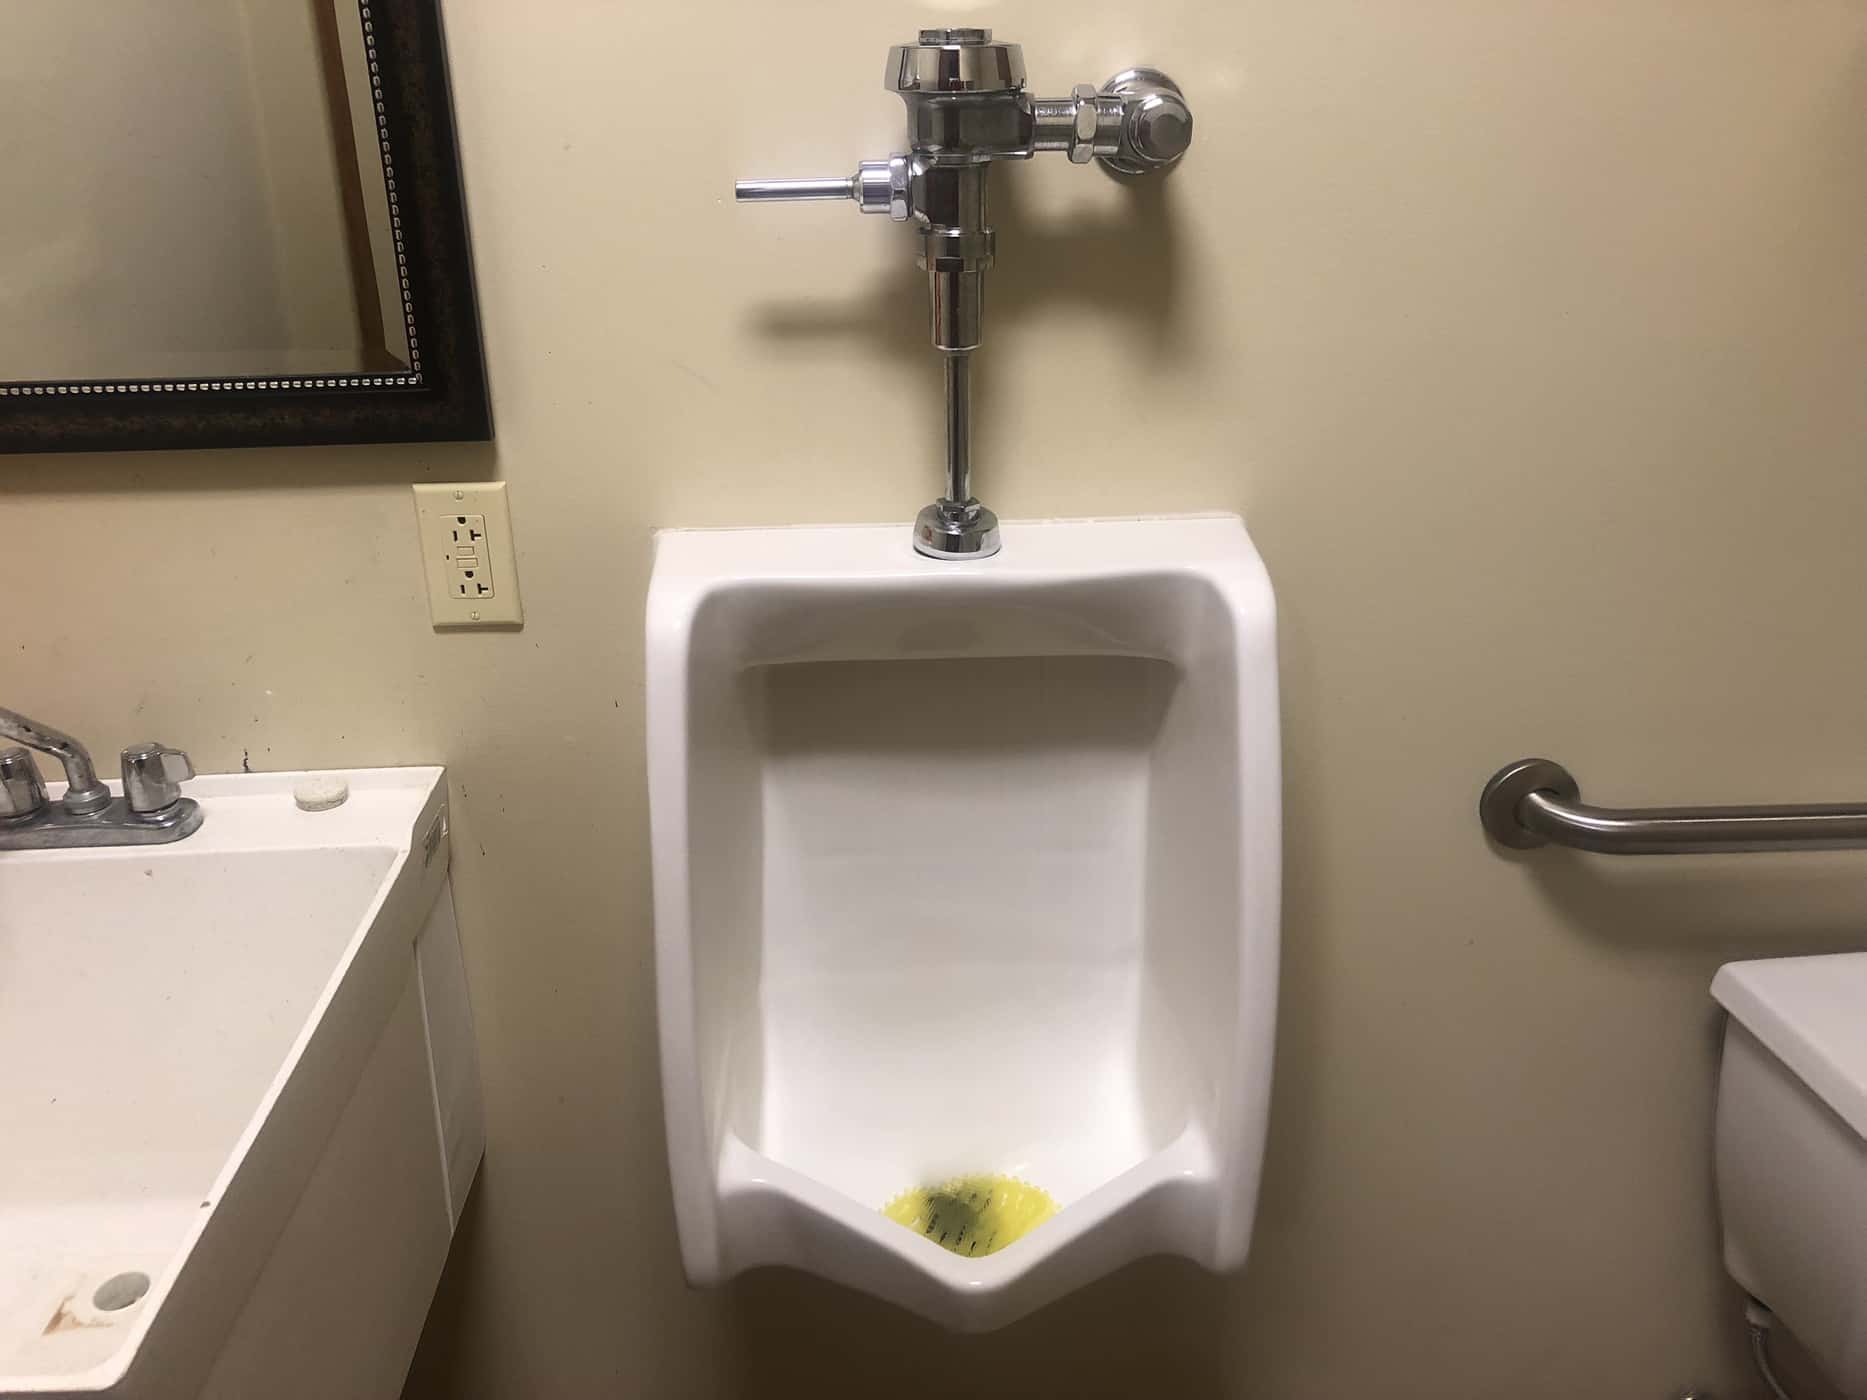 What Causes Urinal Overflow - Carter's My Plumber